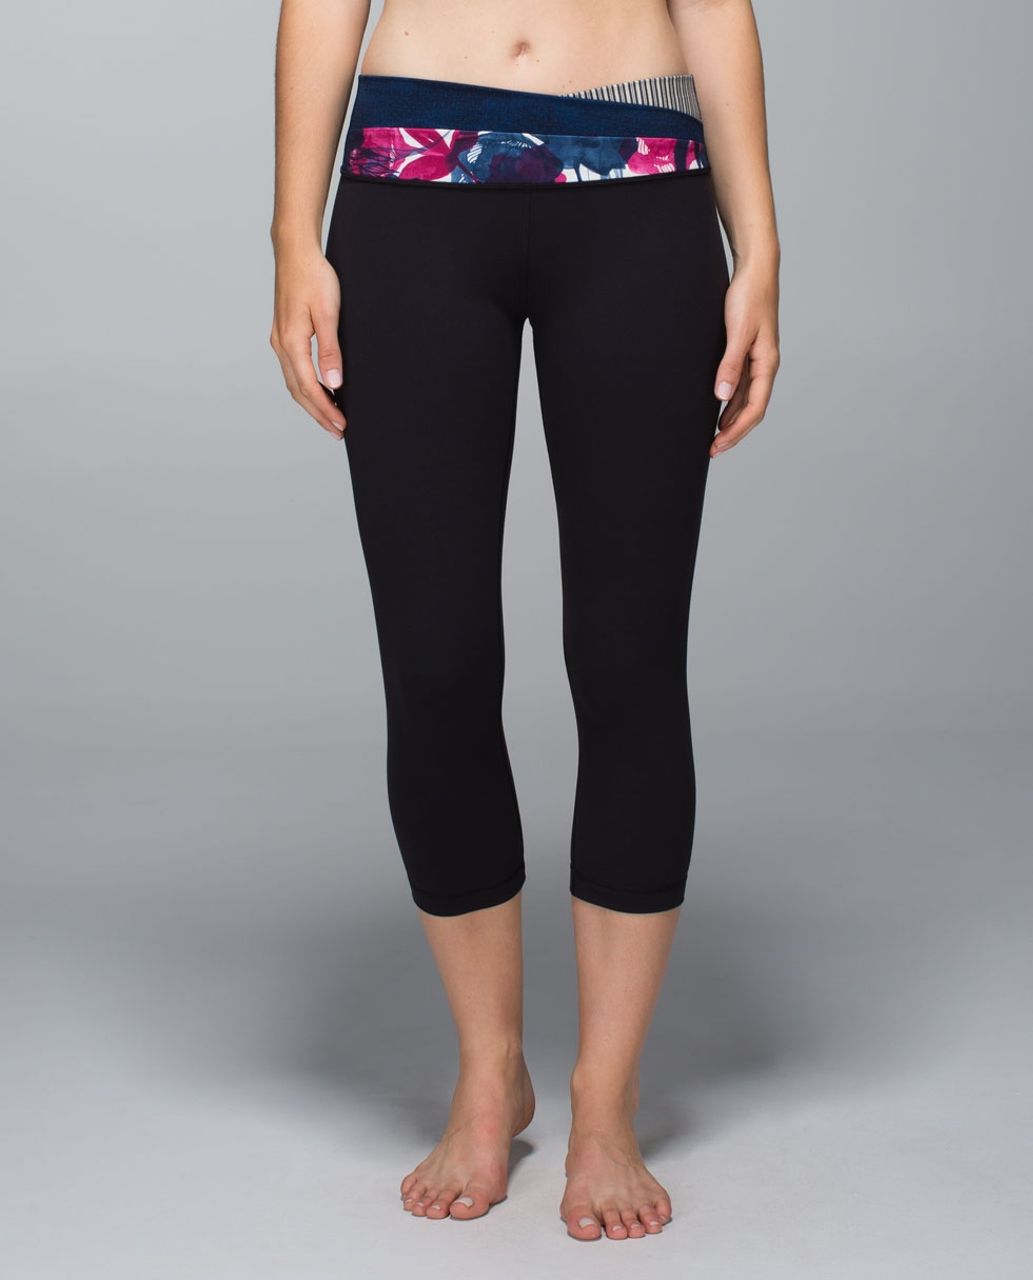 Lululemon Astro Wunder Under Crop II - Black / Sashico Cross Inkwell Rugged Blue / Inky Floral Ghost Inkwell Bumble Berry